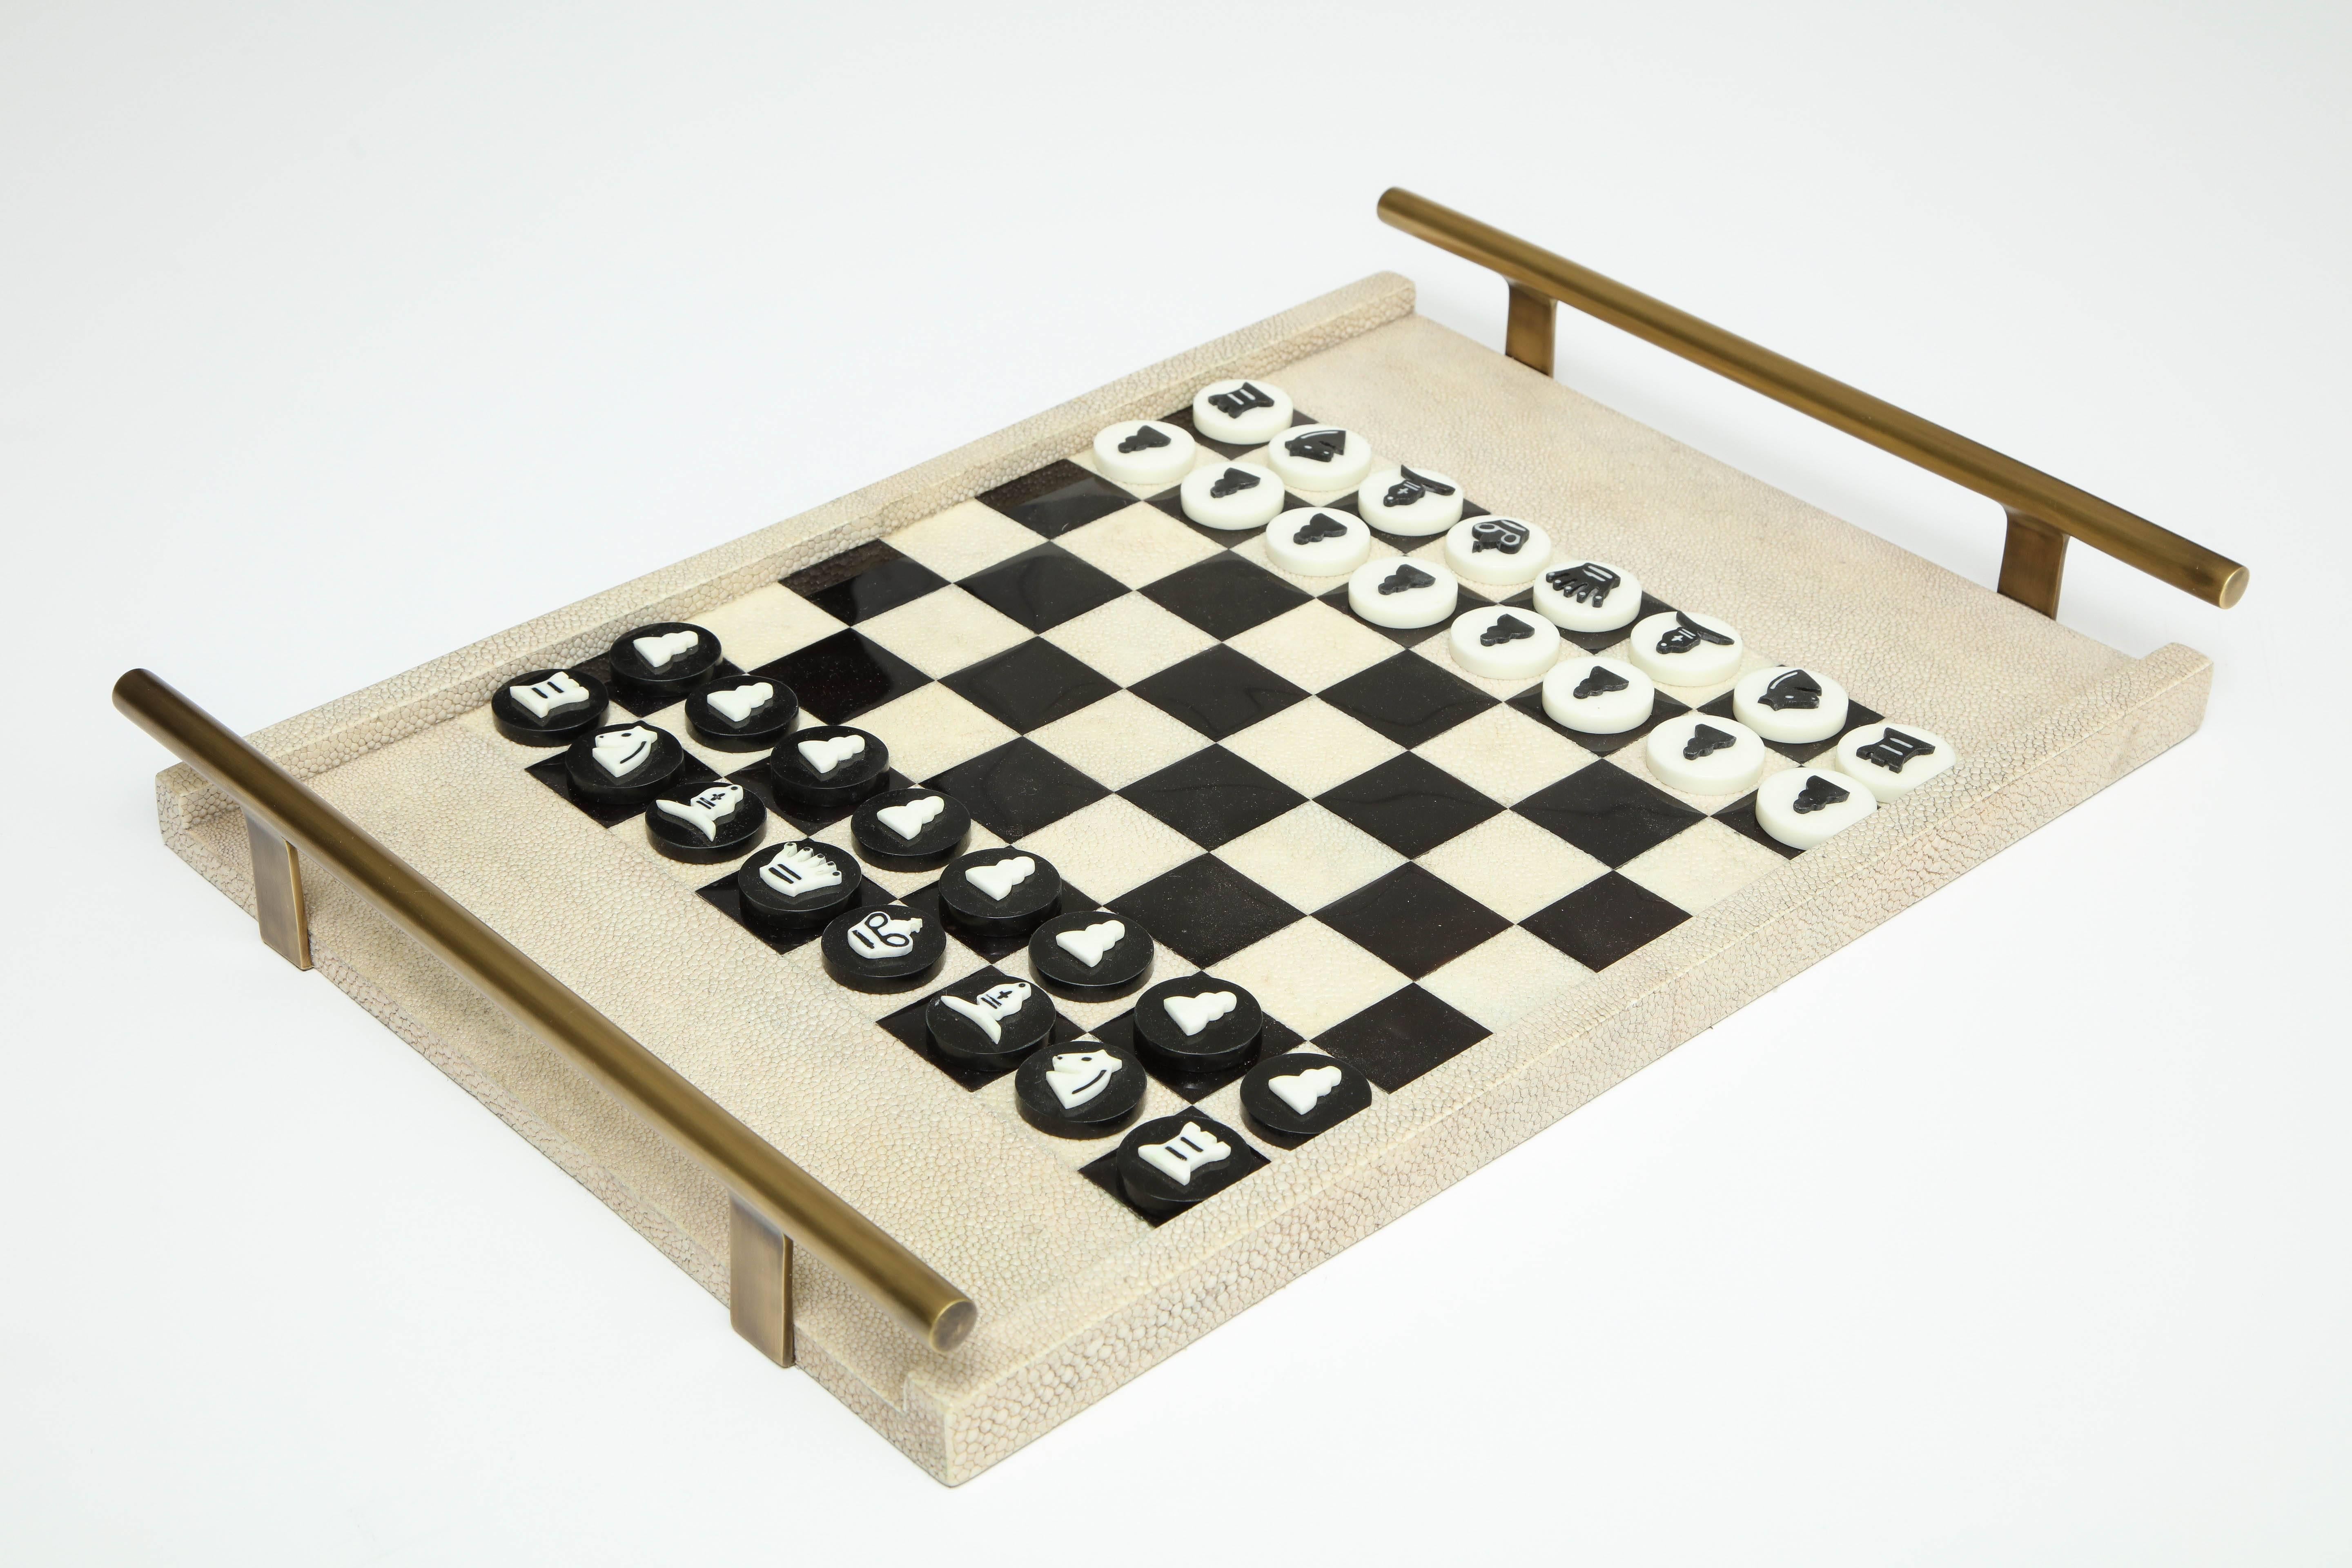 Decorative chess game, France. The game is made of shagreen, sea shells and bronze.